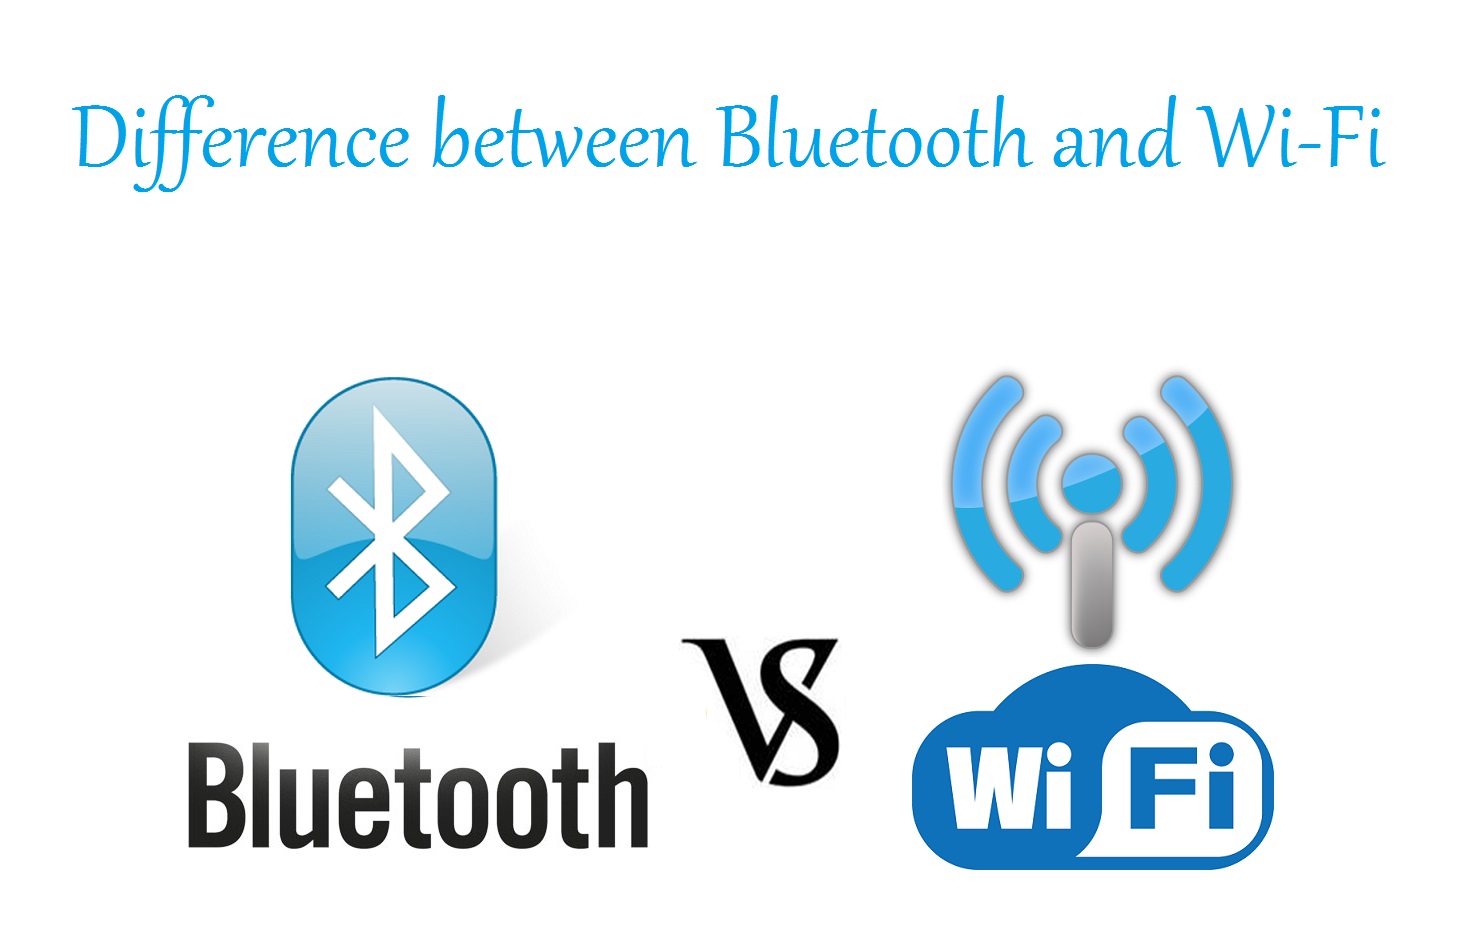 Difference between Bluetooth and Wi-Fi